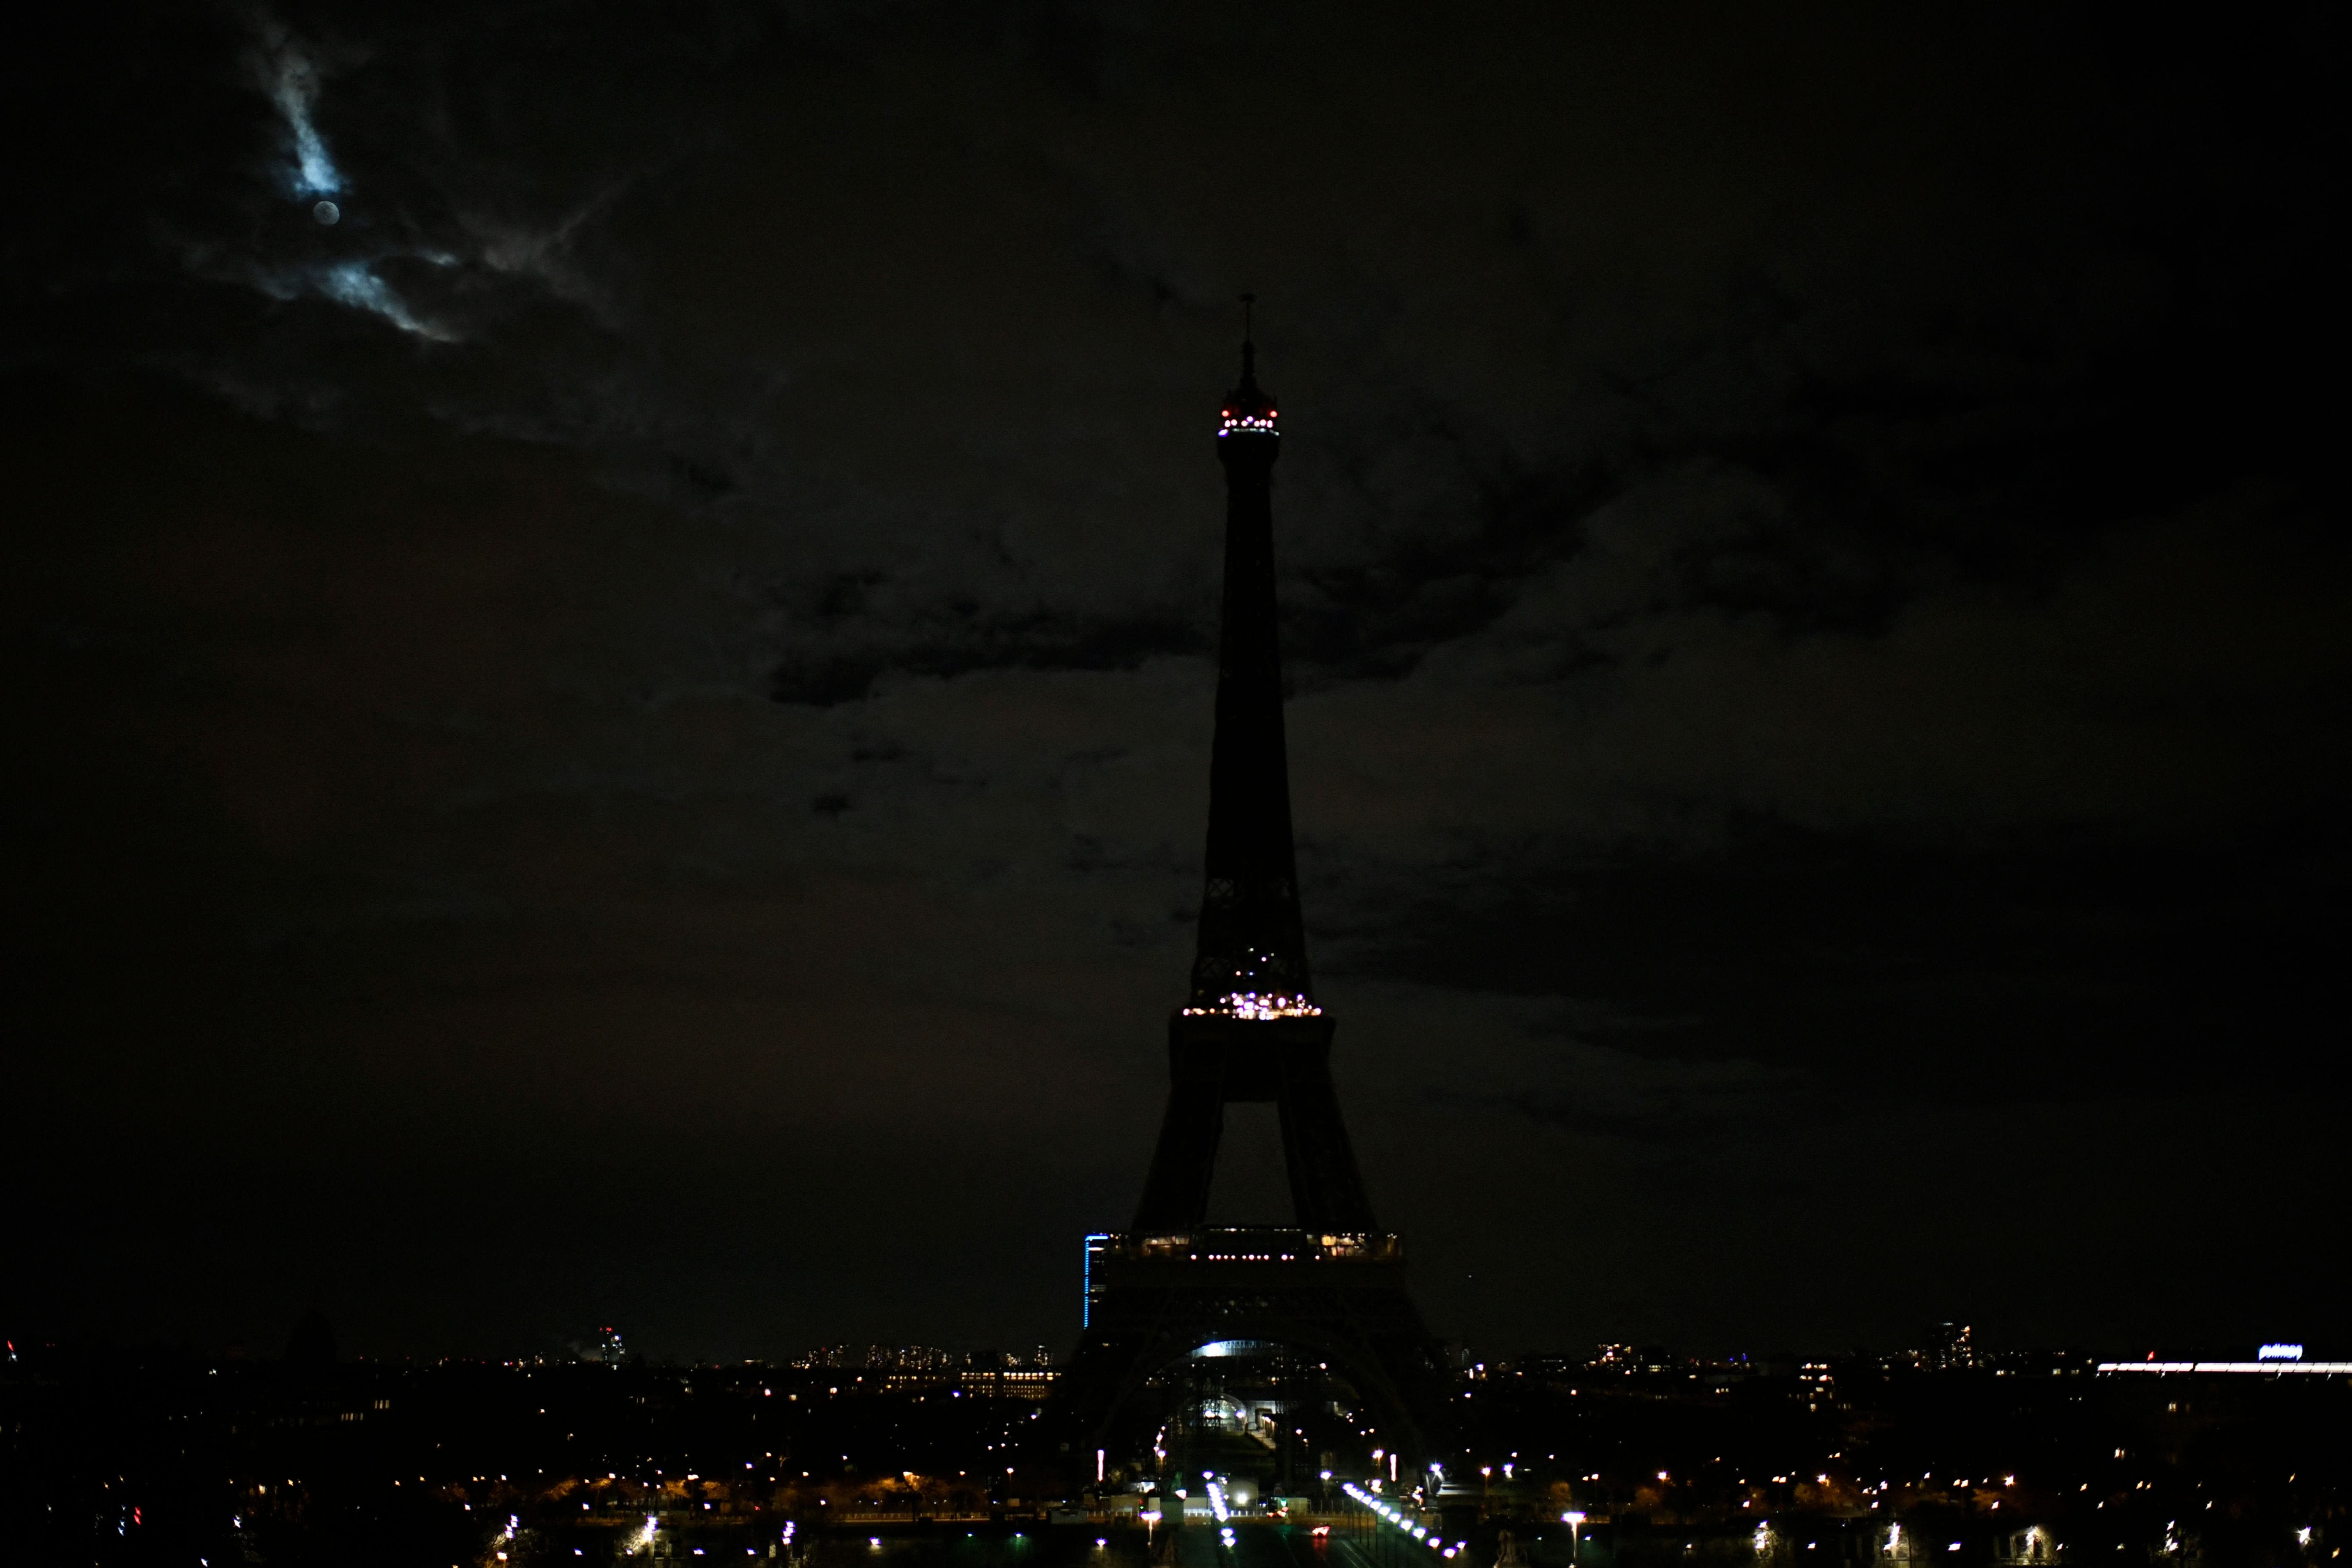 Image of Eiffel Tower in darkness captured during 2021 climate campaign | Fact check